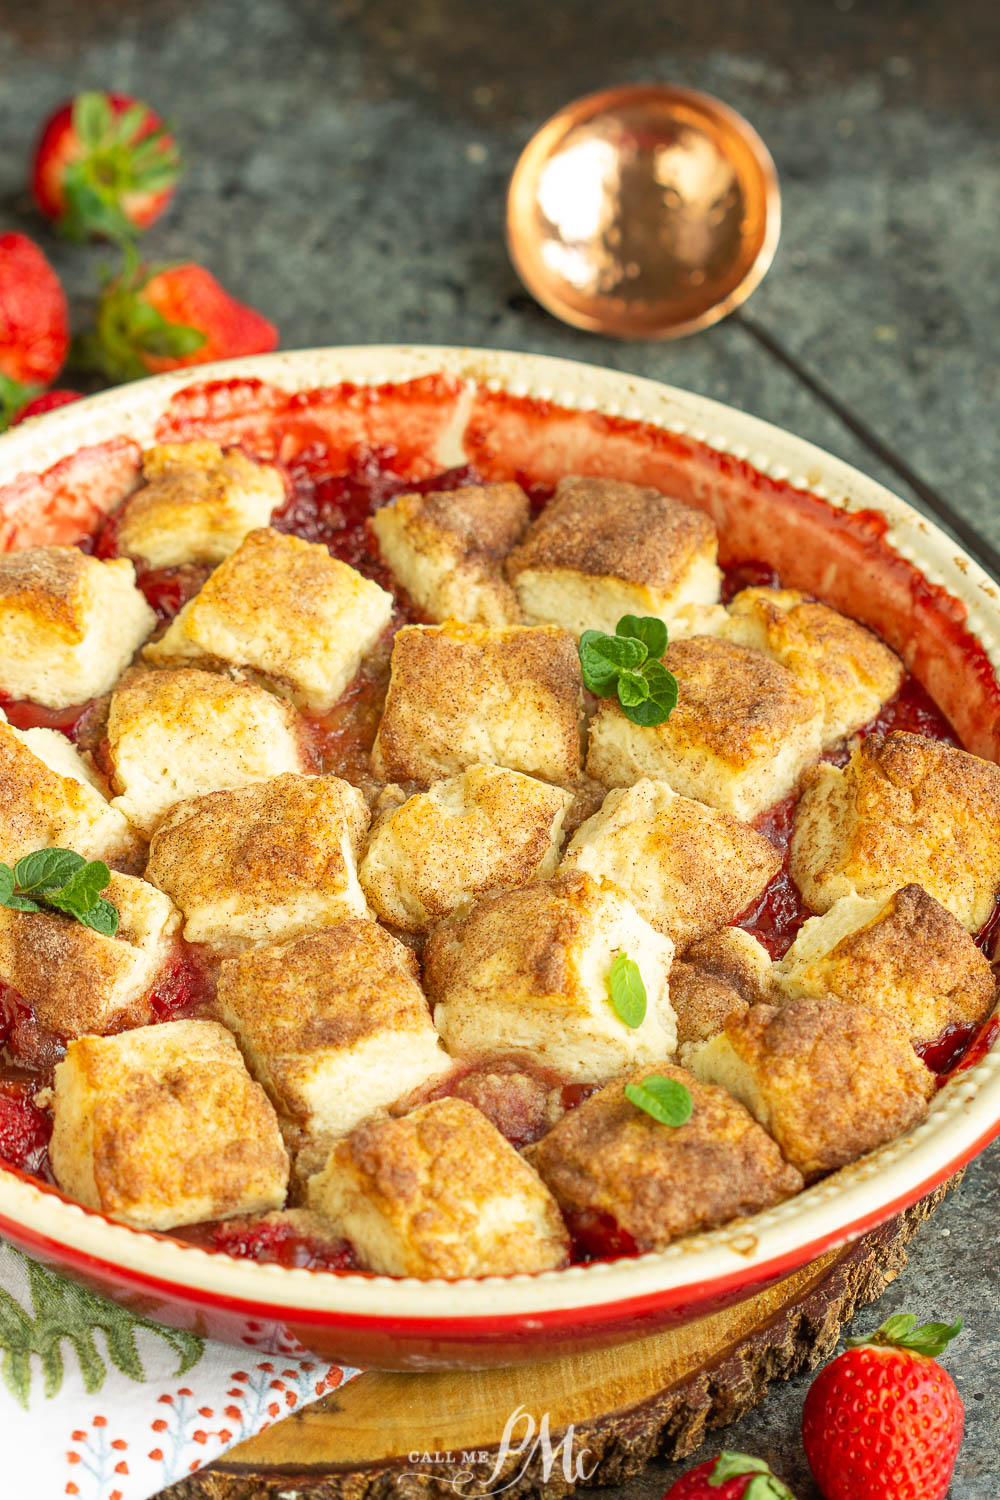 Strawberry Cobbler with cinnamon sugar biscuits